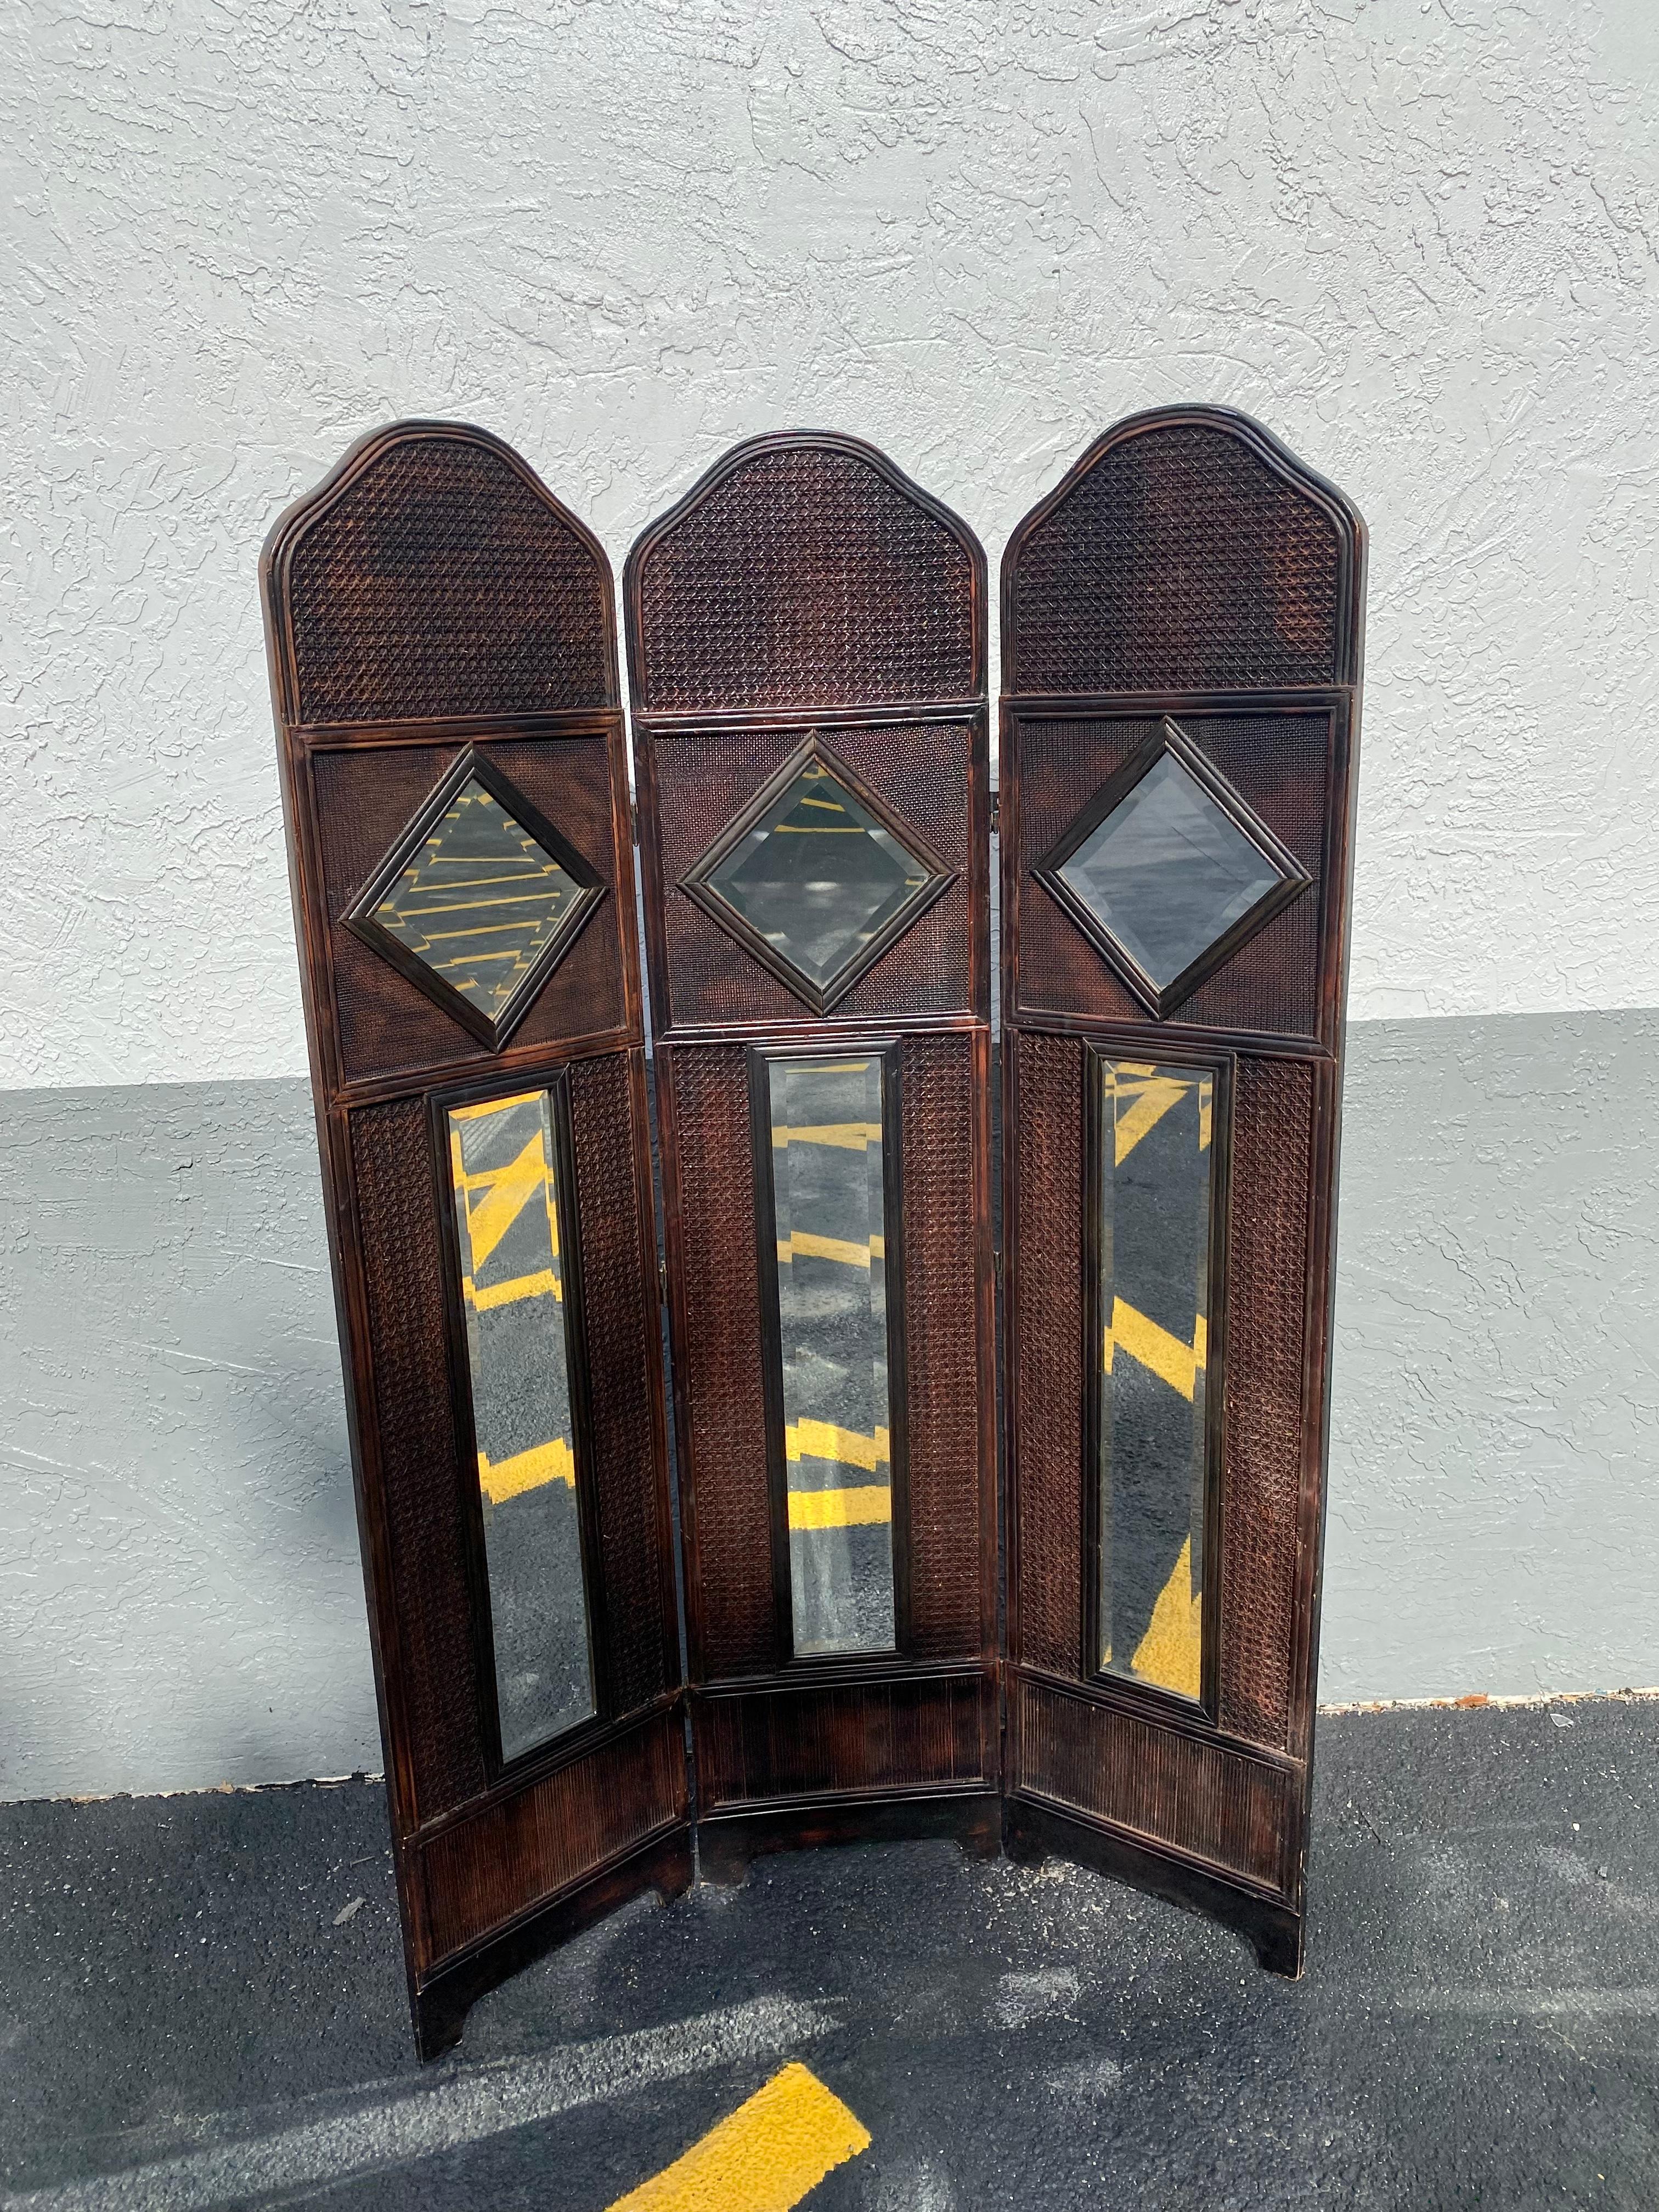 1970s Rattan Room Divider Screen Floor Mirror In Good Condition For Sale In Fort Lauderdale, FL